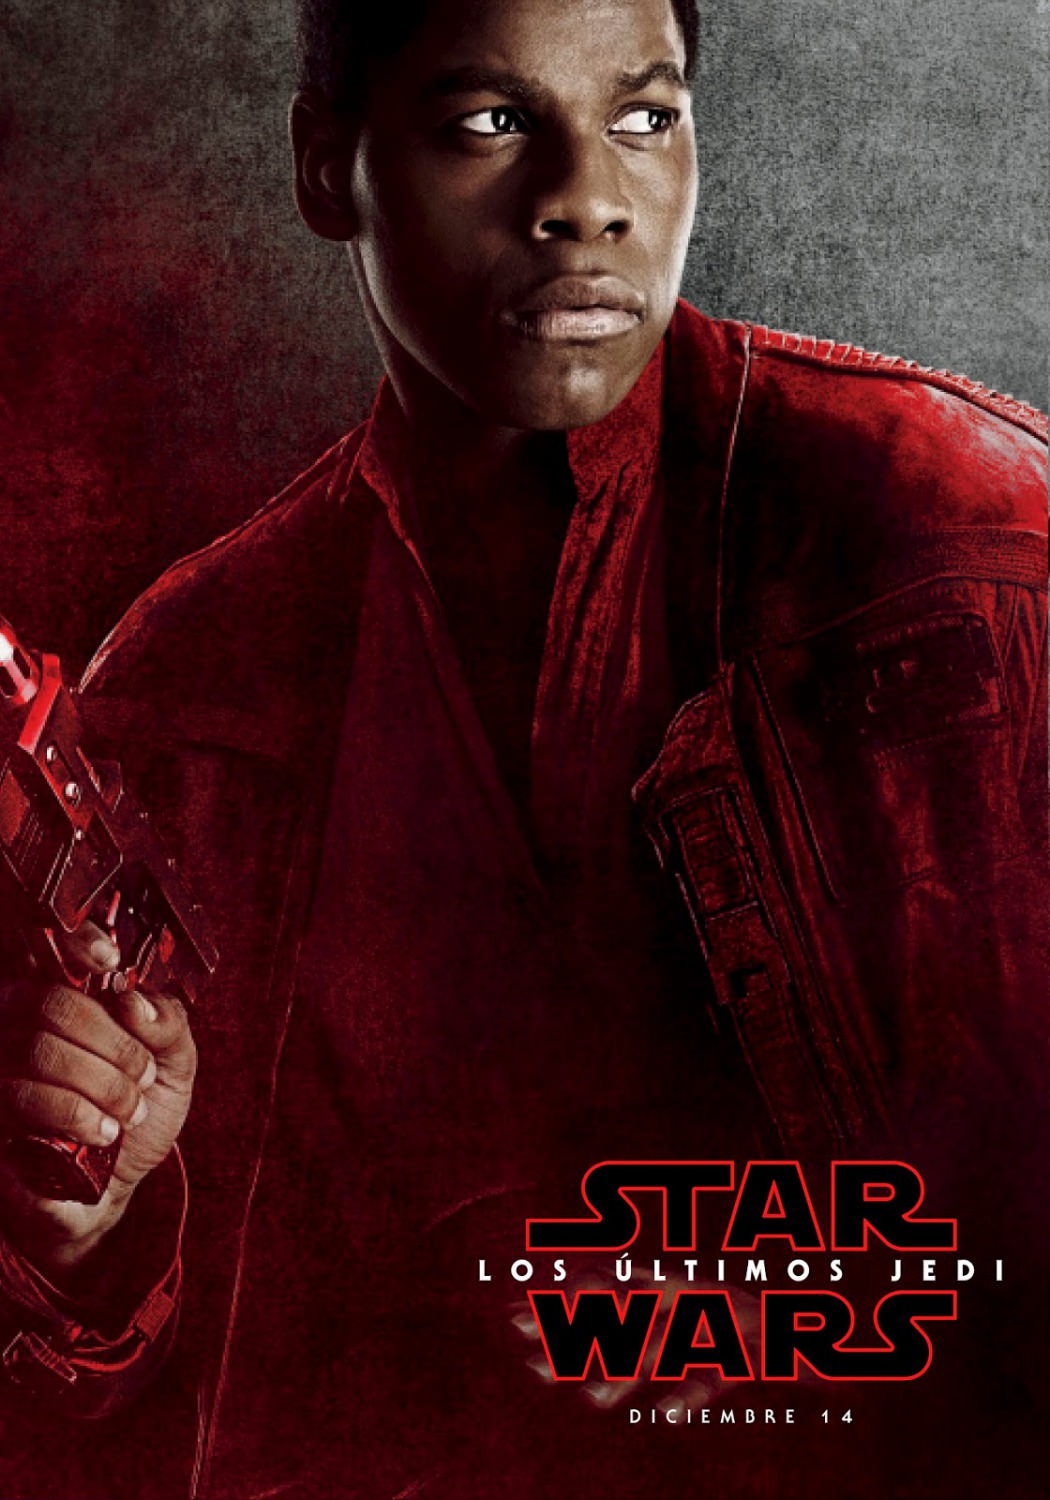 Star Wars The Last Jedi character POsters